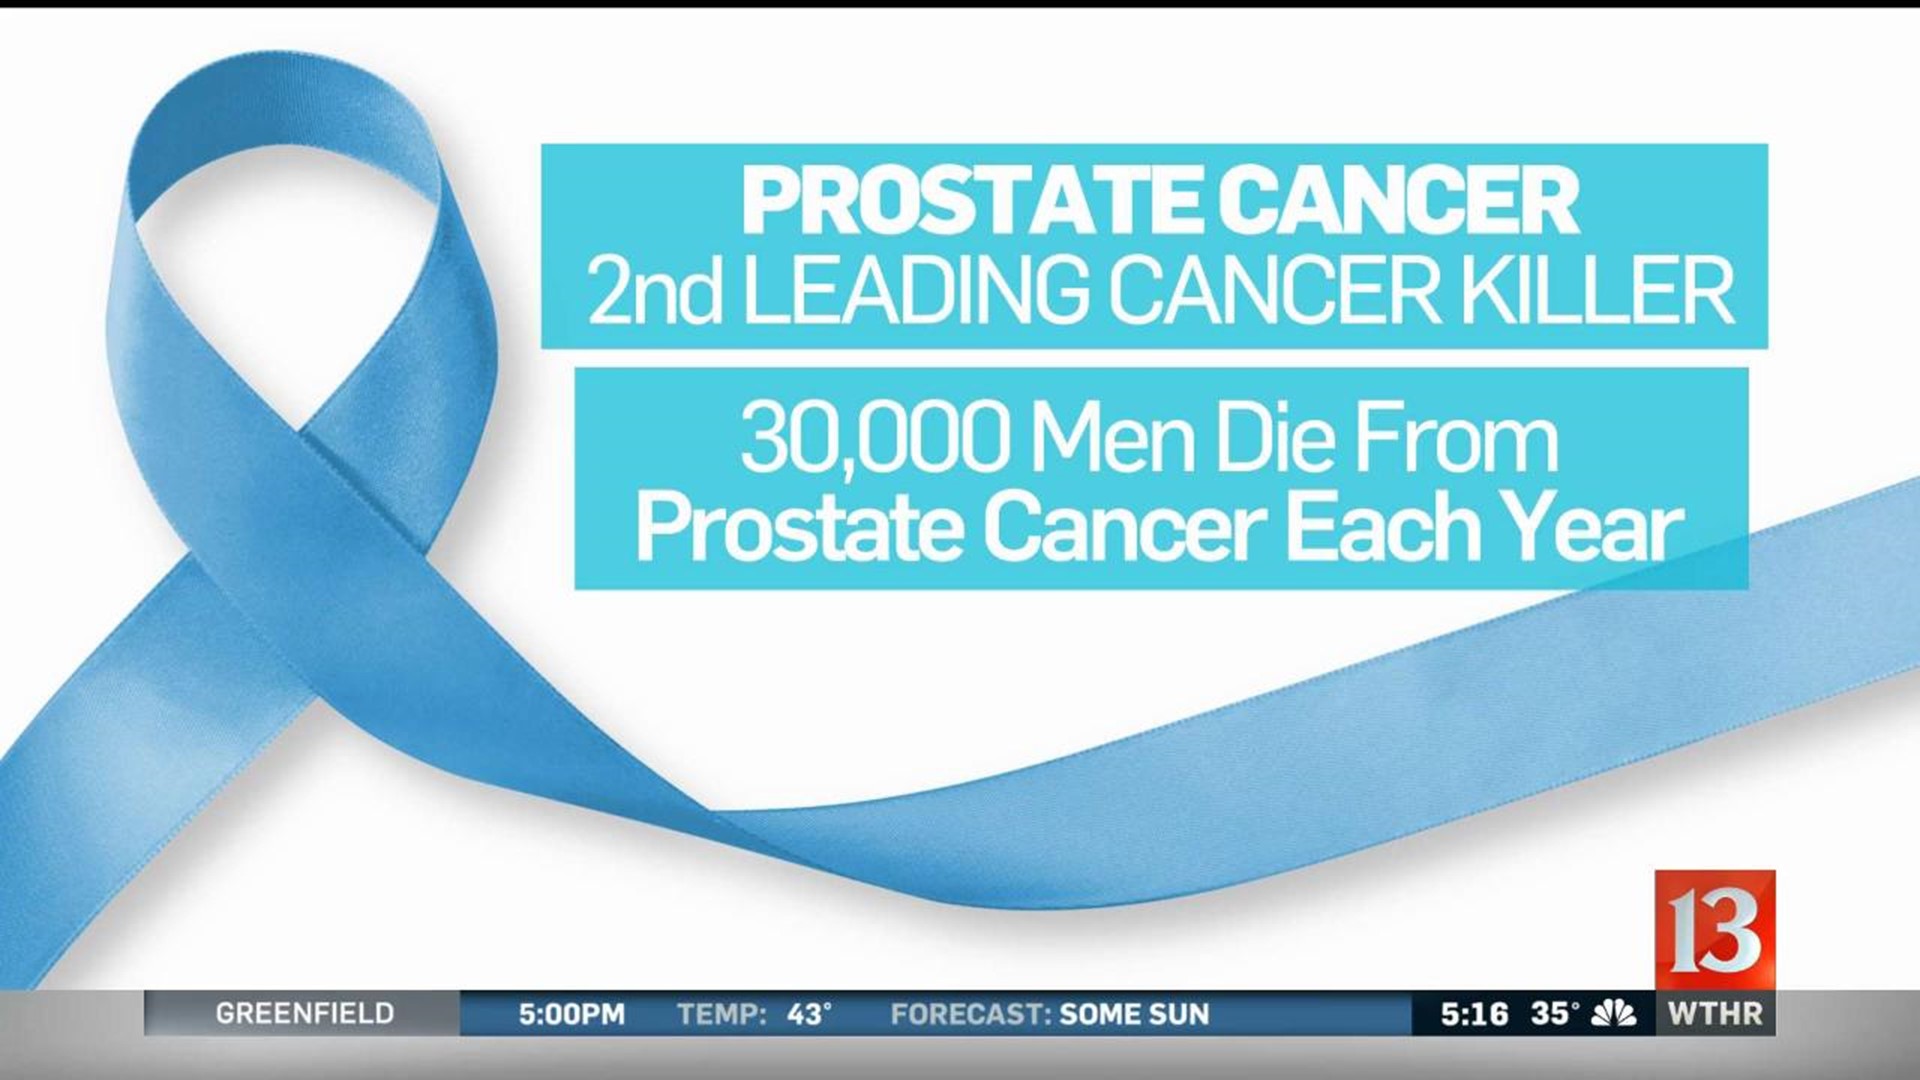 Talking about prostate cancer